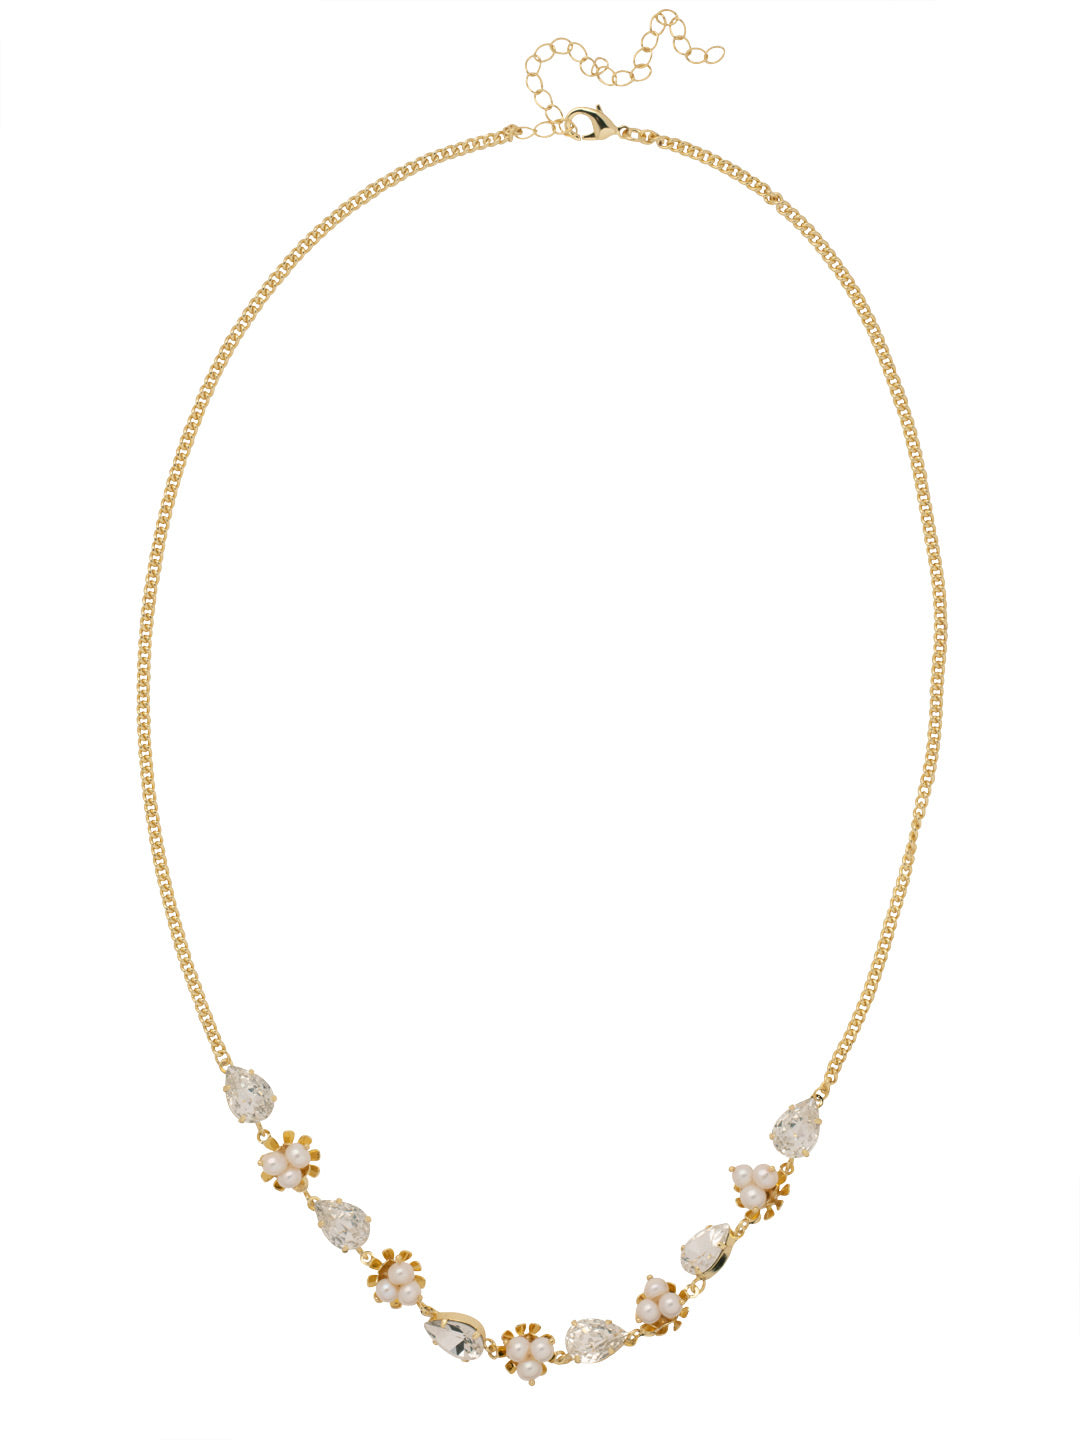 Nesta Pear Long Necklace - NFG50BGMDP - <p>The Nesta Pear Long Necklace features alternating pear cut crystals and nested freshwater petal pearls on a long adjustable chain, secured with a lobster claw clasp. From Sorrelli's Modern Pearl collection in our Bright Gold-tone finish.</p>